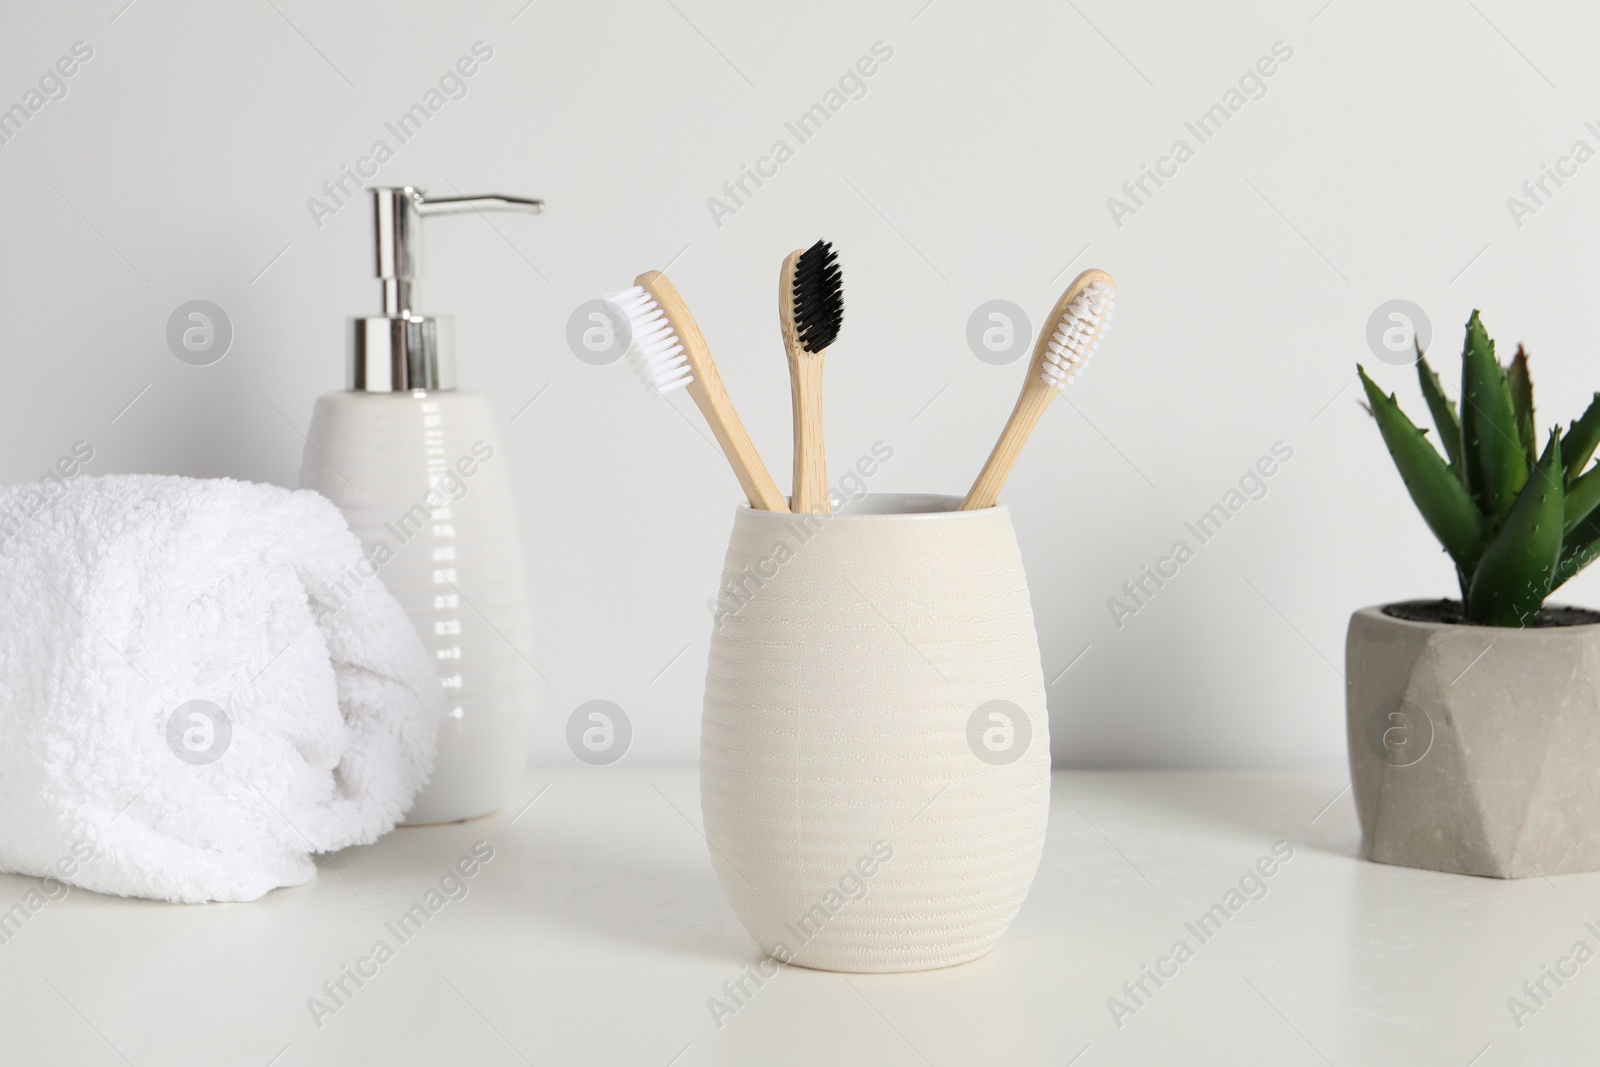 Photo of Bamboo toothbrushes in holder, potted plant, towel and cosmetic product on white countertop